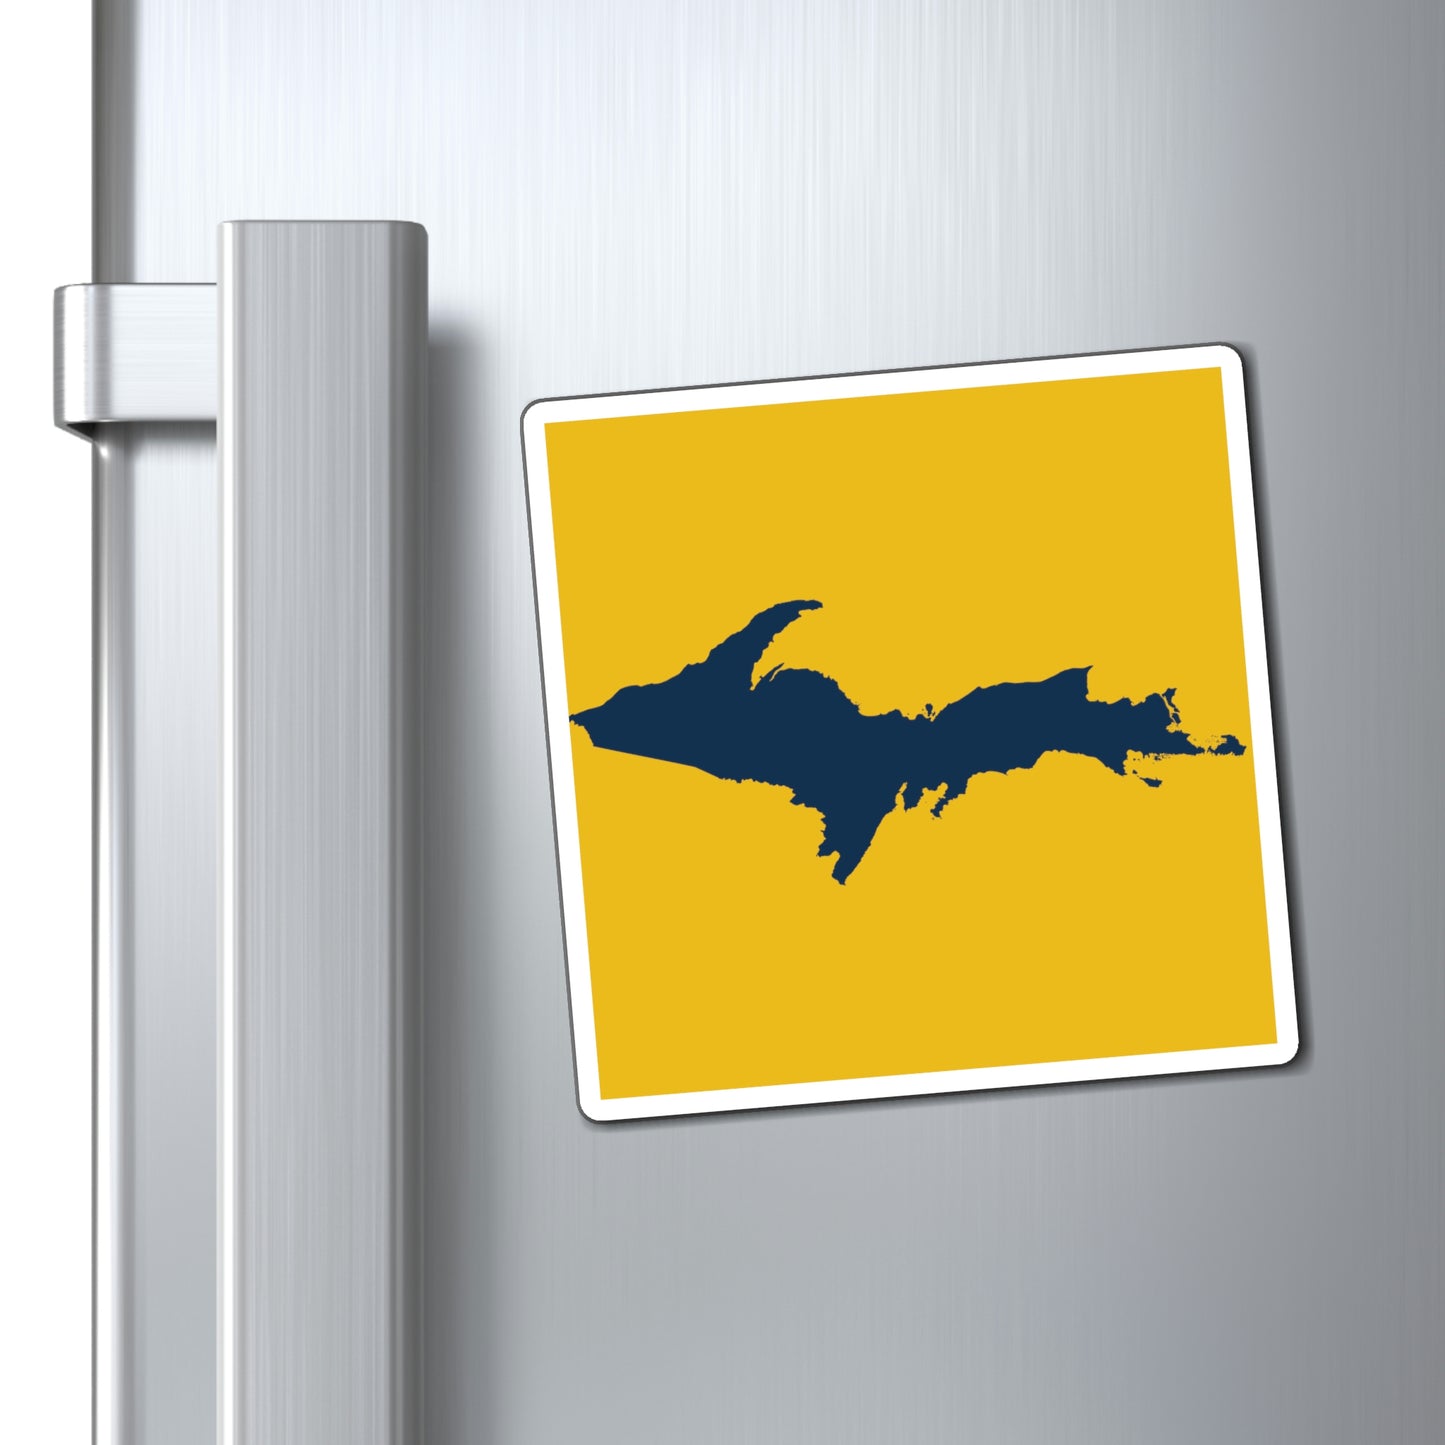 Michigan Upper Peninsula Square Magnet (Gold w/ Navy UP Outline)